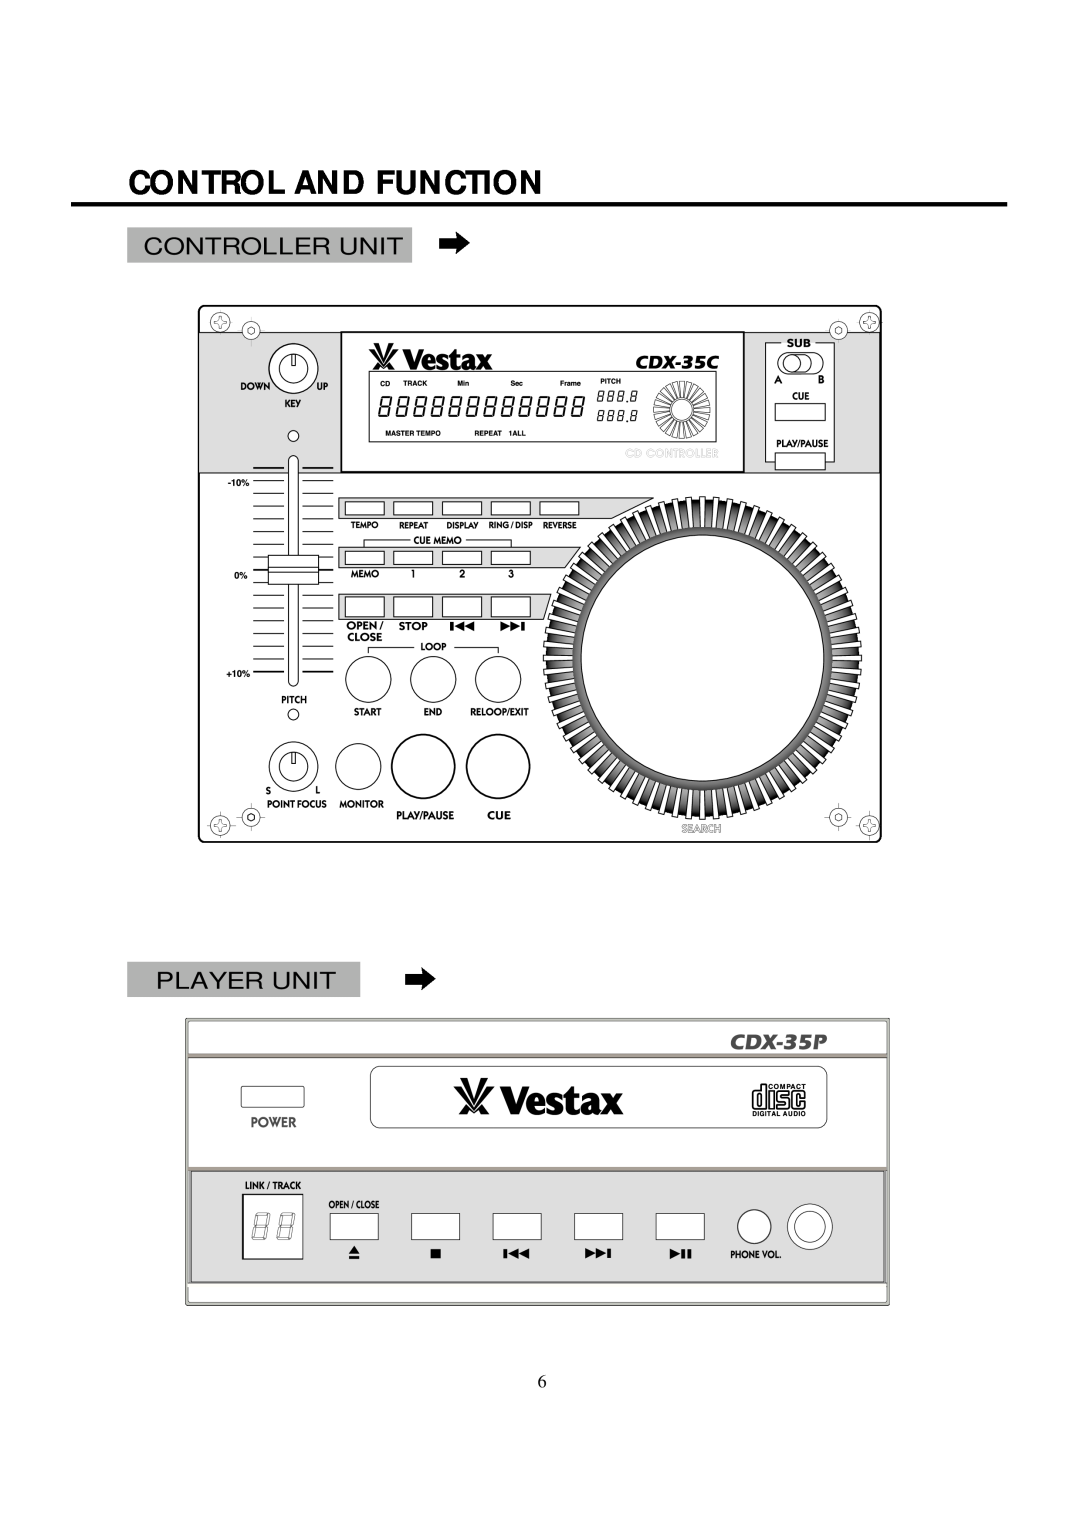 Vestax CDX-35C, CDX-35P owner manual Control And Function, Controller Unit Player Unit 